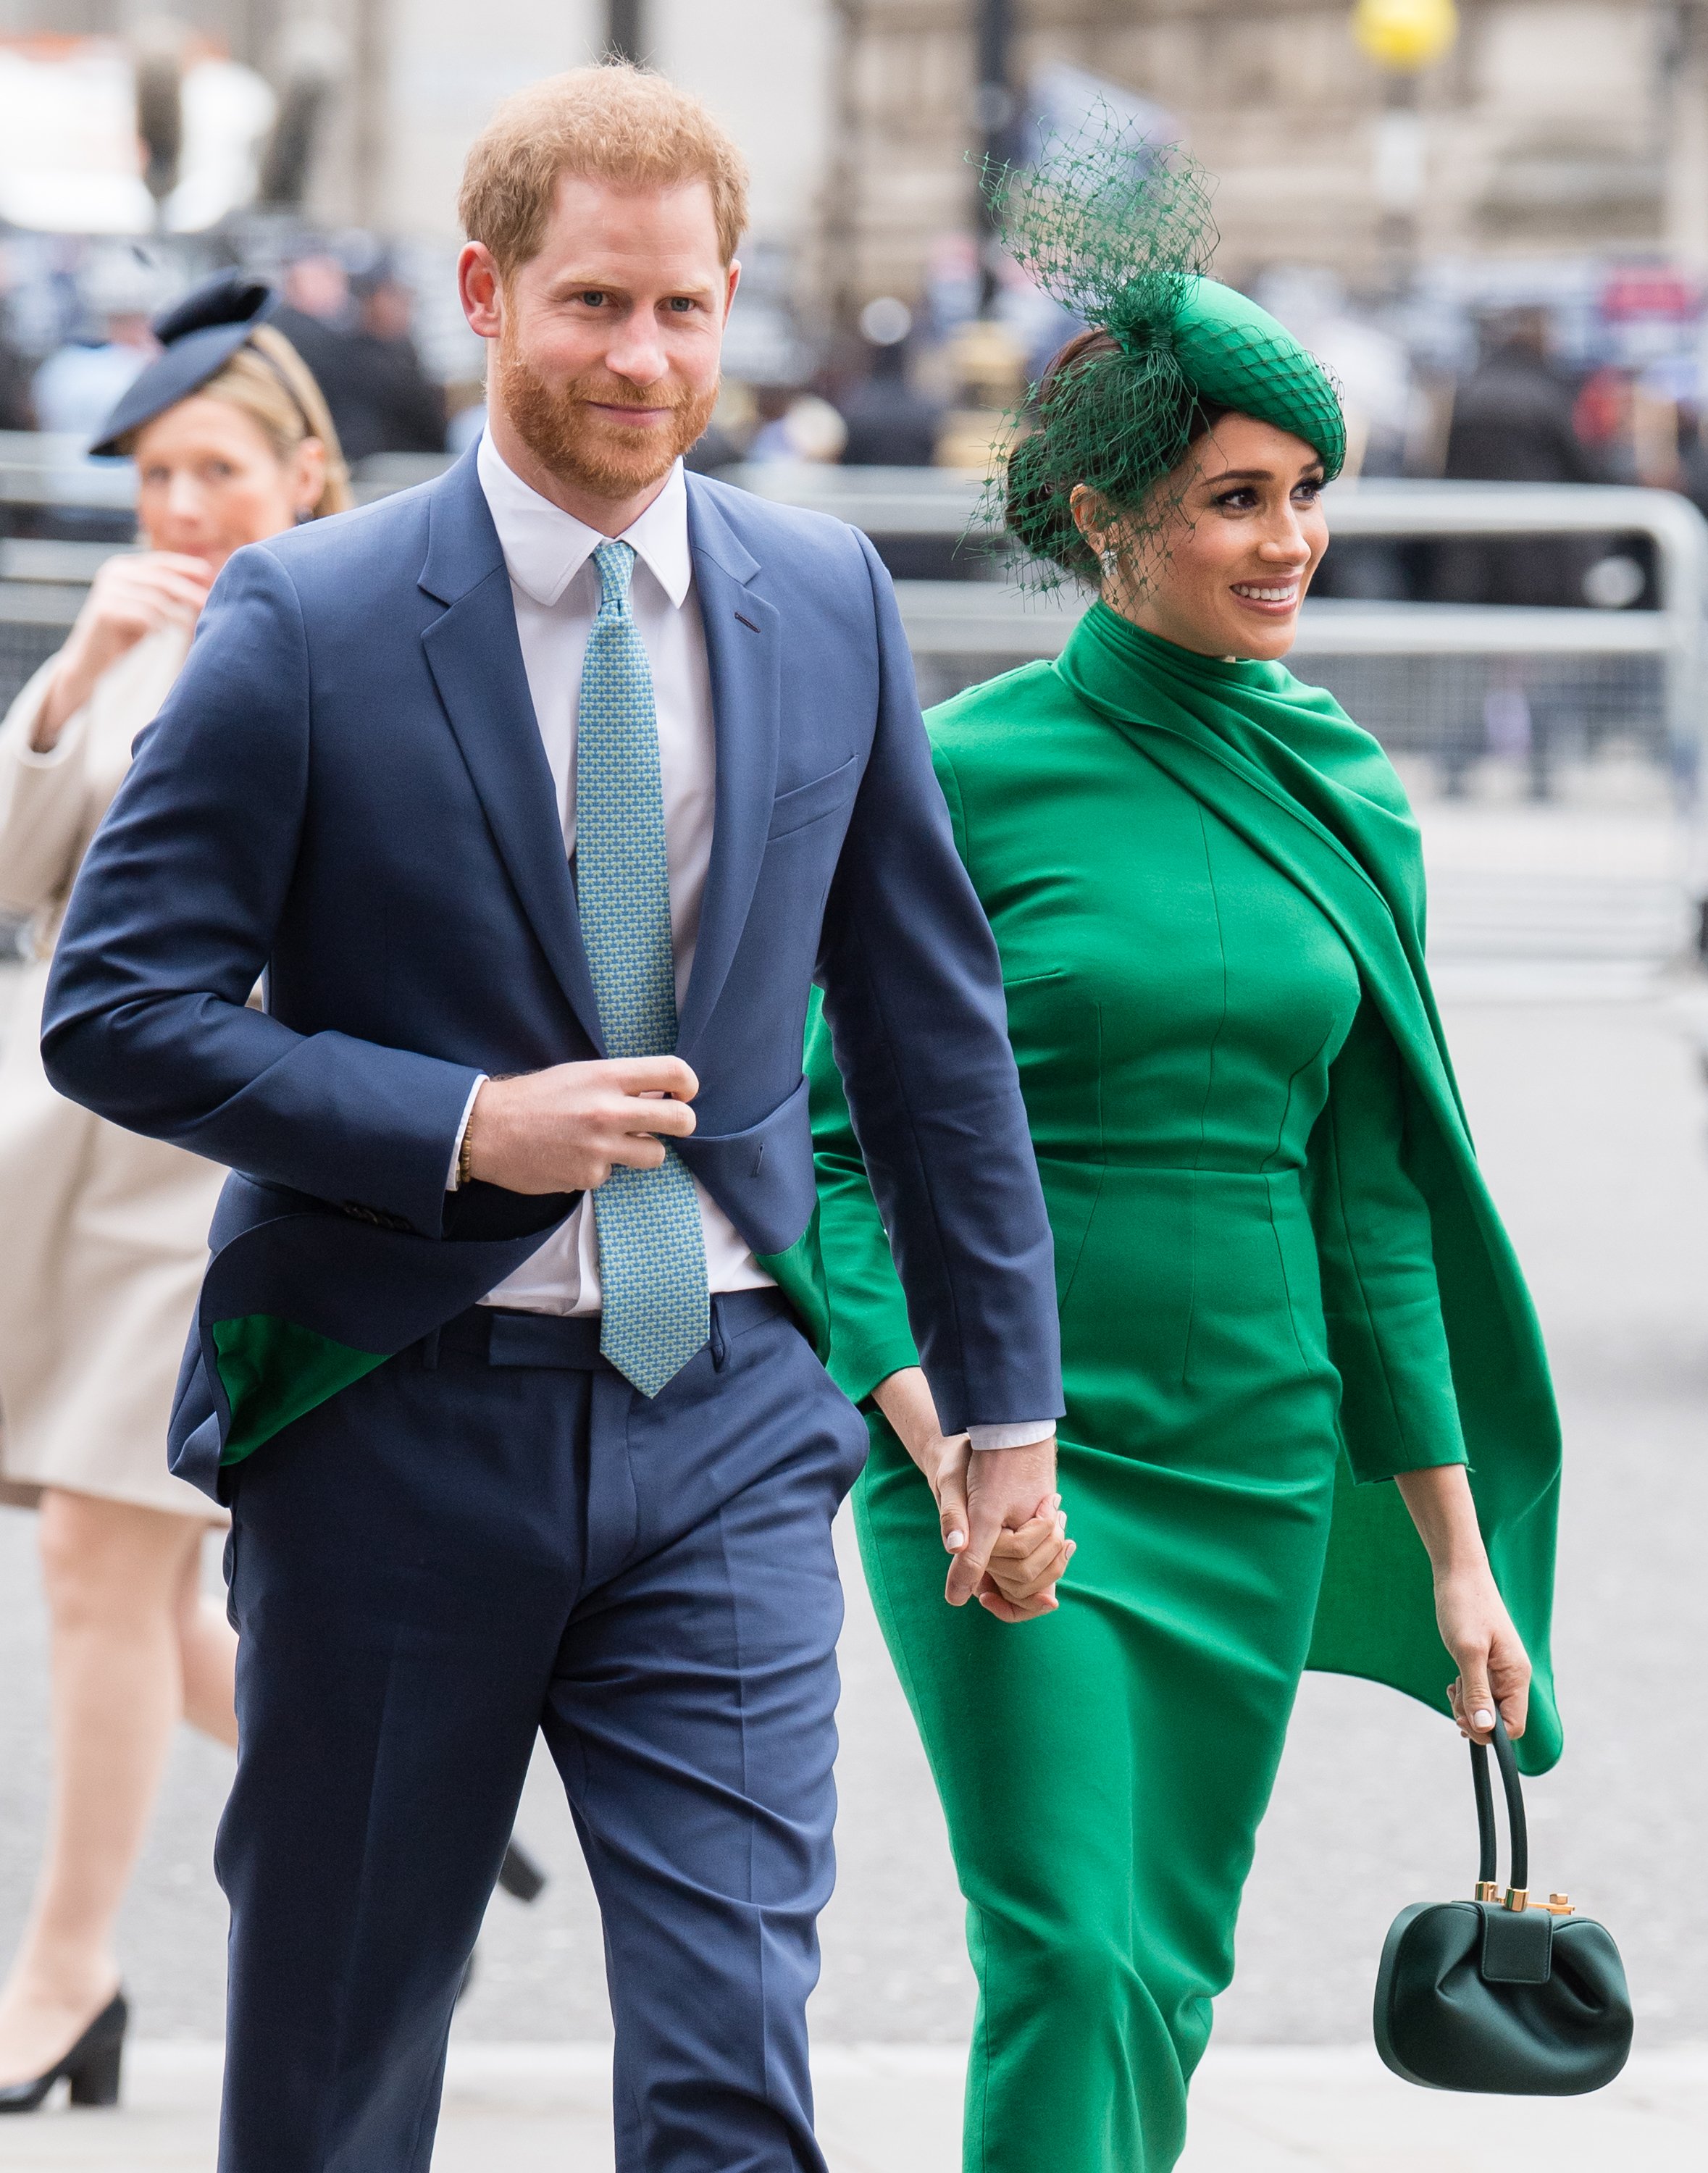 Prince Harry and Meghan Markle, Duke and Duchess of Sussex, attend the Commonwealth Day Service 2020, London, England. | Photo: Getty Images